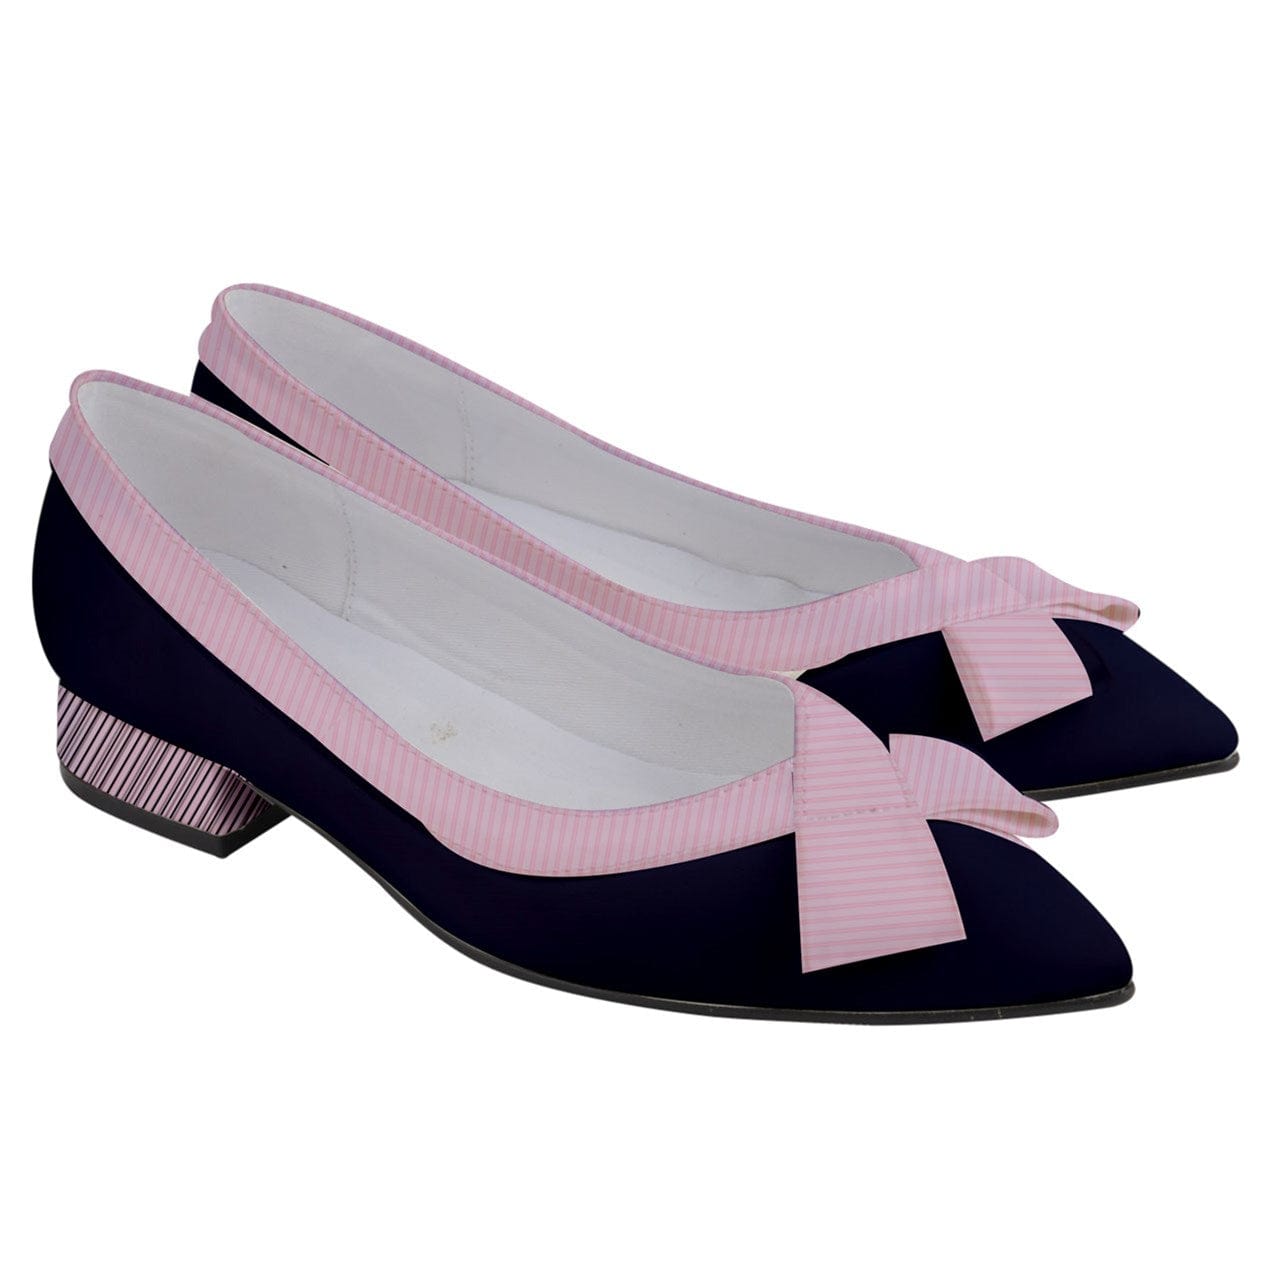 the-wheaten-store-women-s-bow-heels-navy-and-pink-heeled-sandals-32983541022917